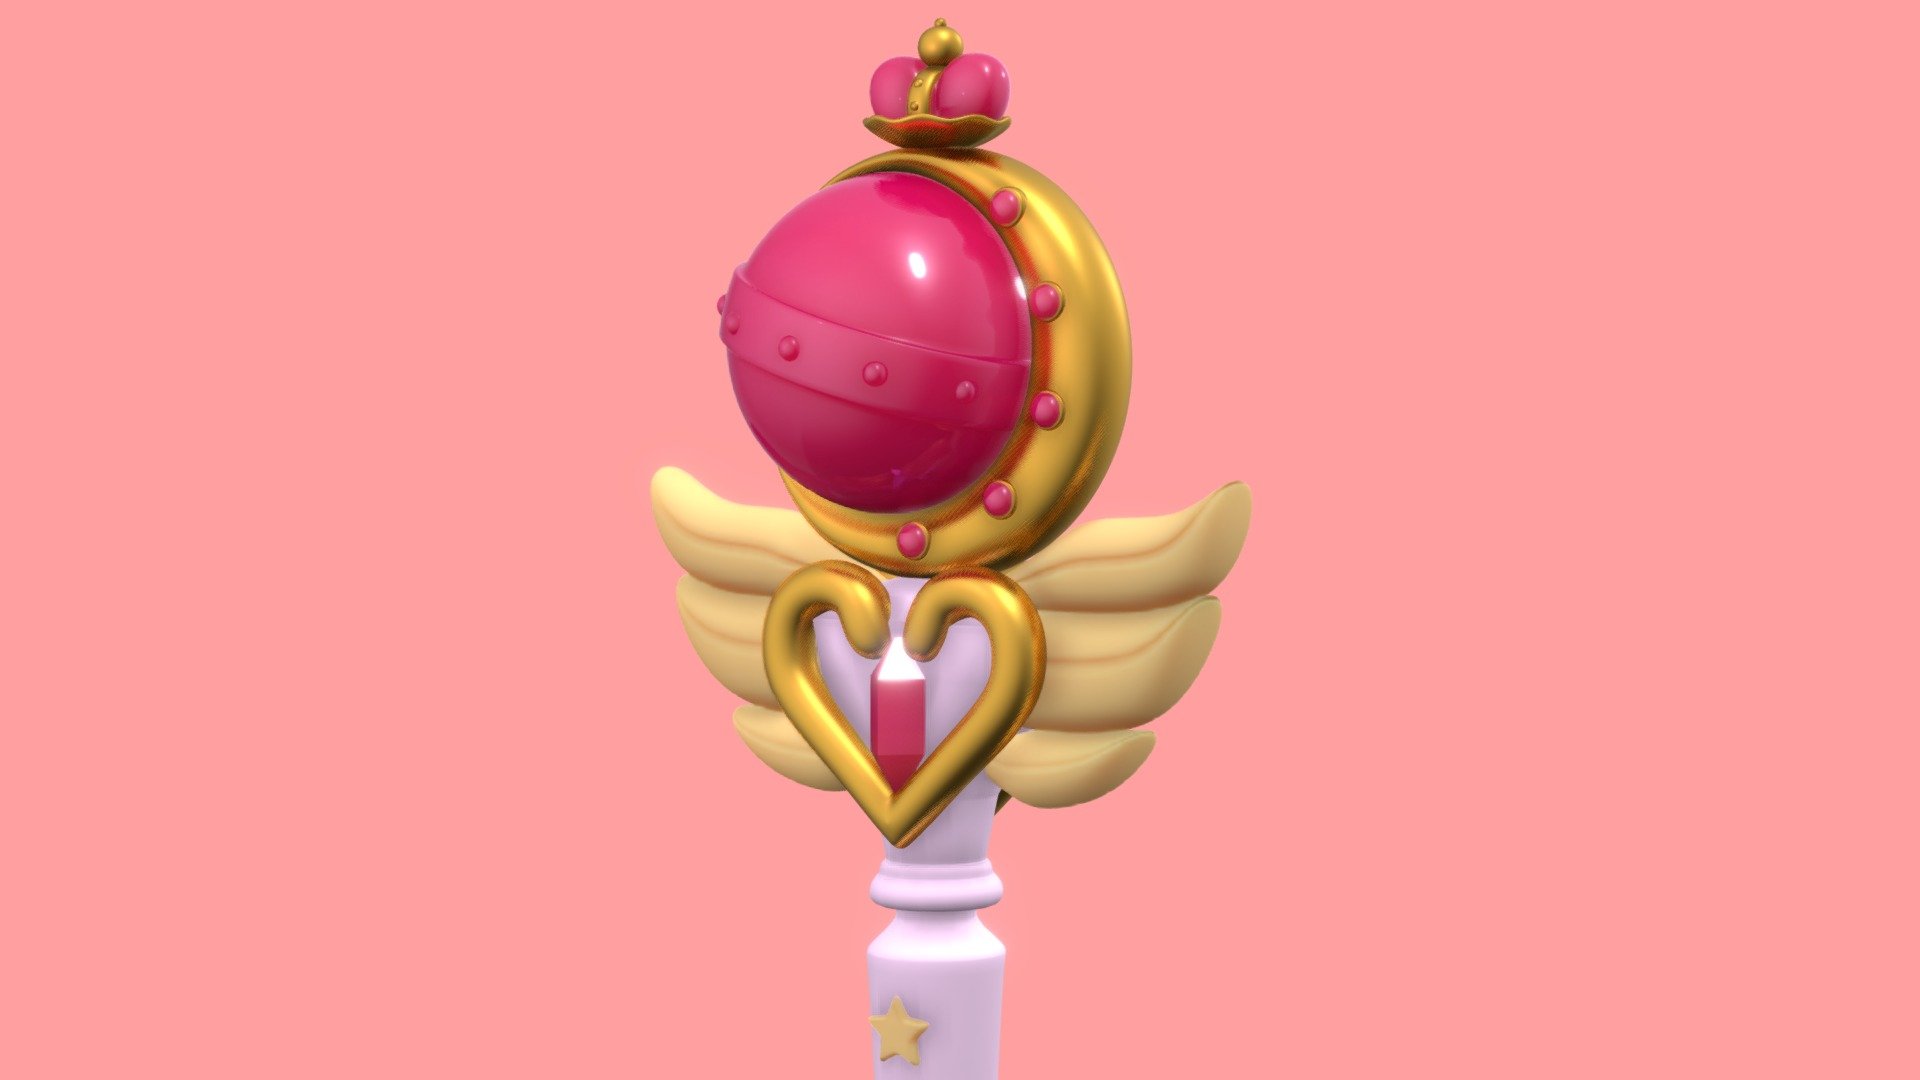 I made this wand in 2019, when I was just learning to model objects. I did it, of course, because of my apprecoation of the series - Sailor Moon's Nostalgic Wand - 3D model by RikkiLorie 3d model